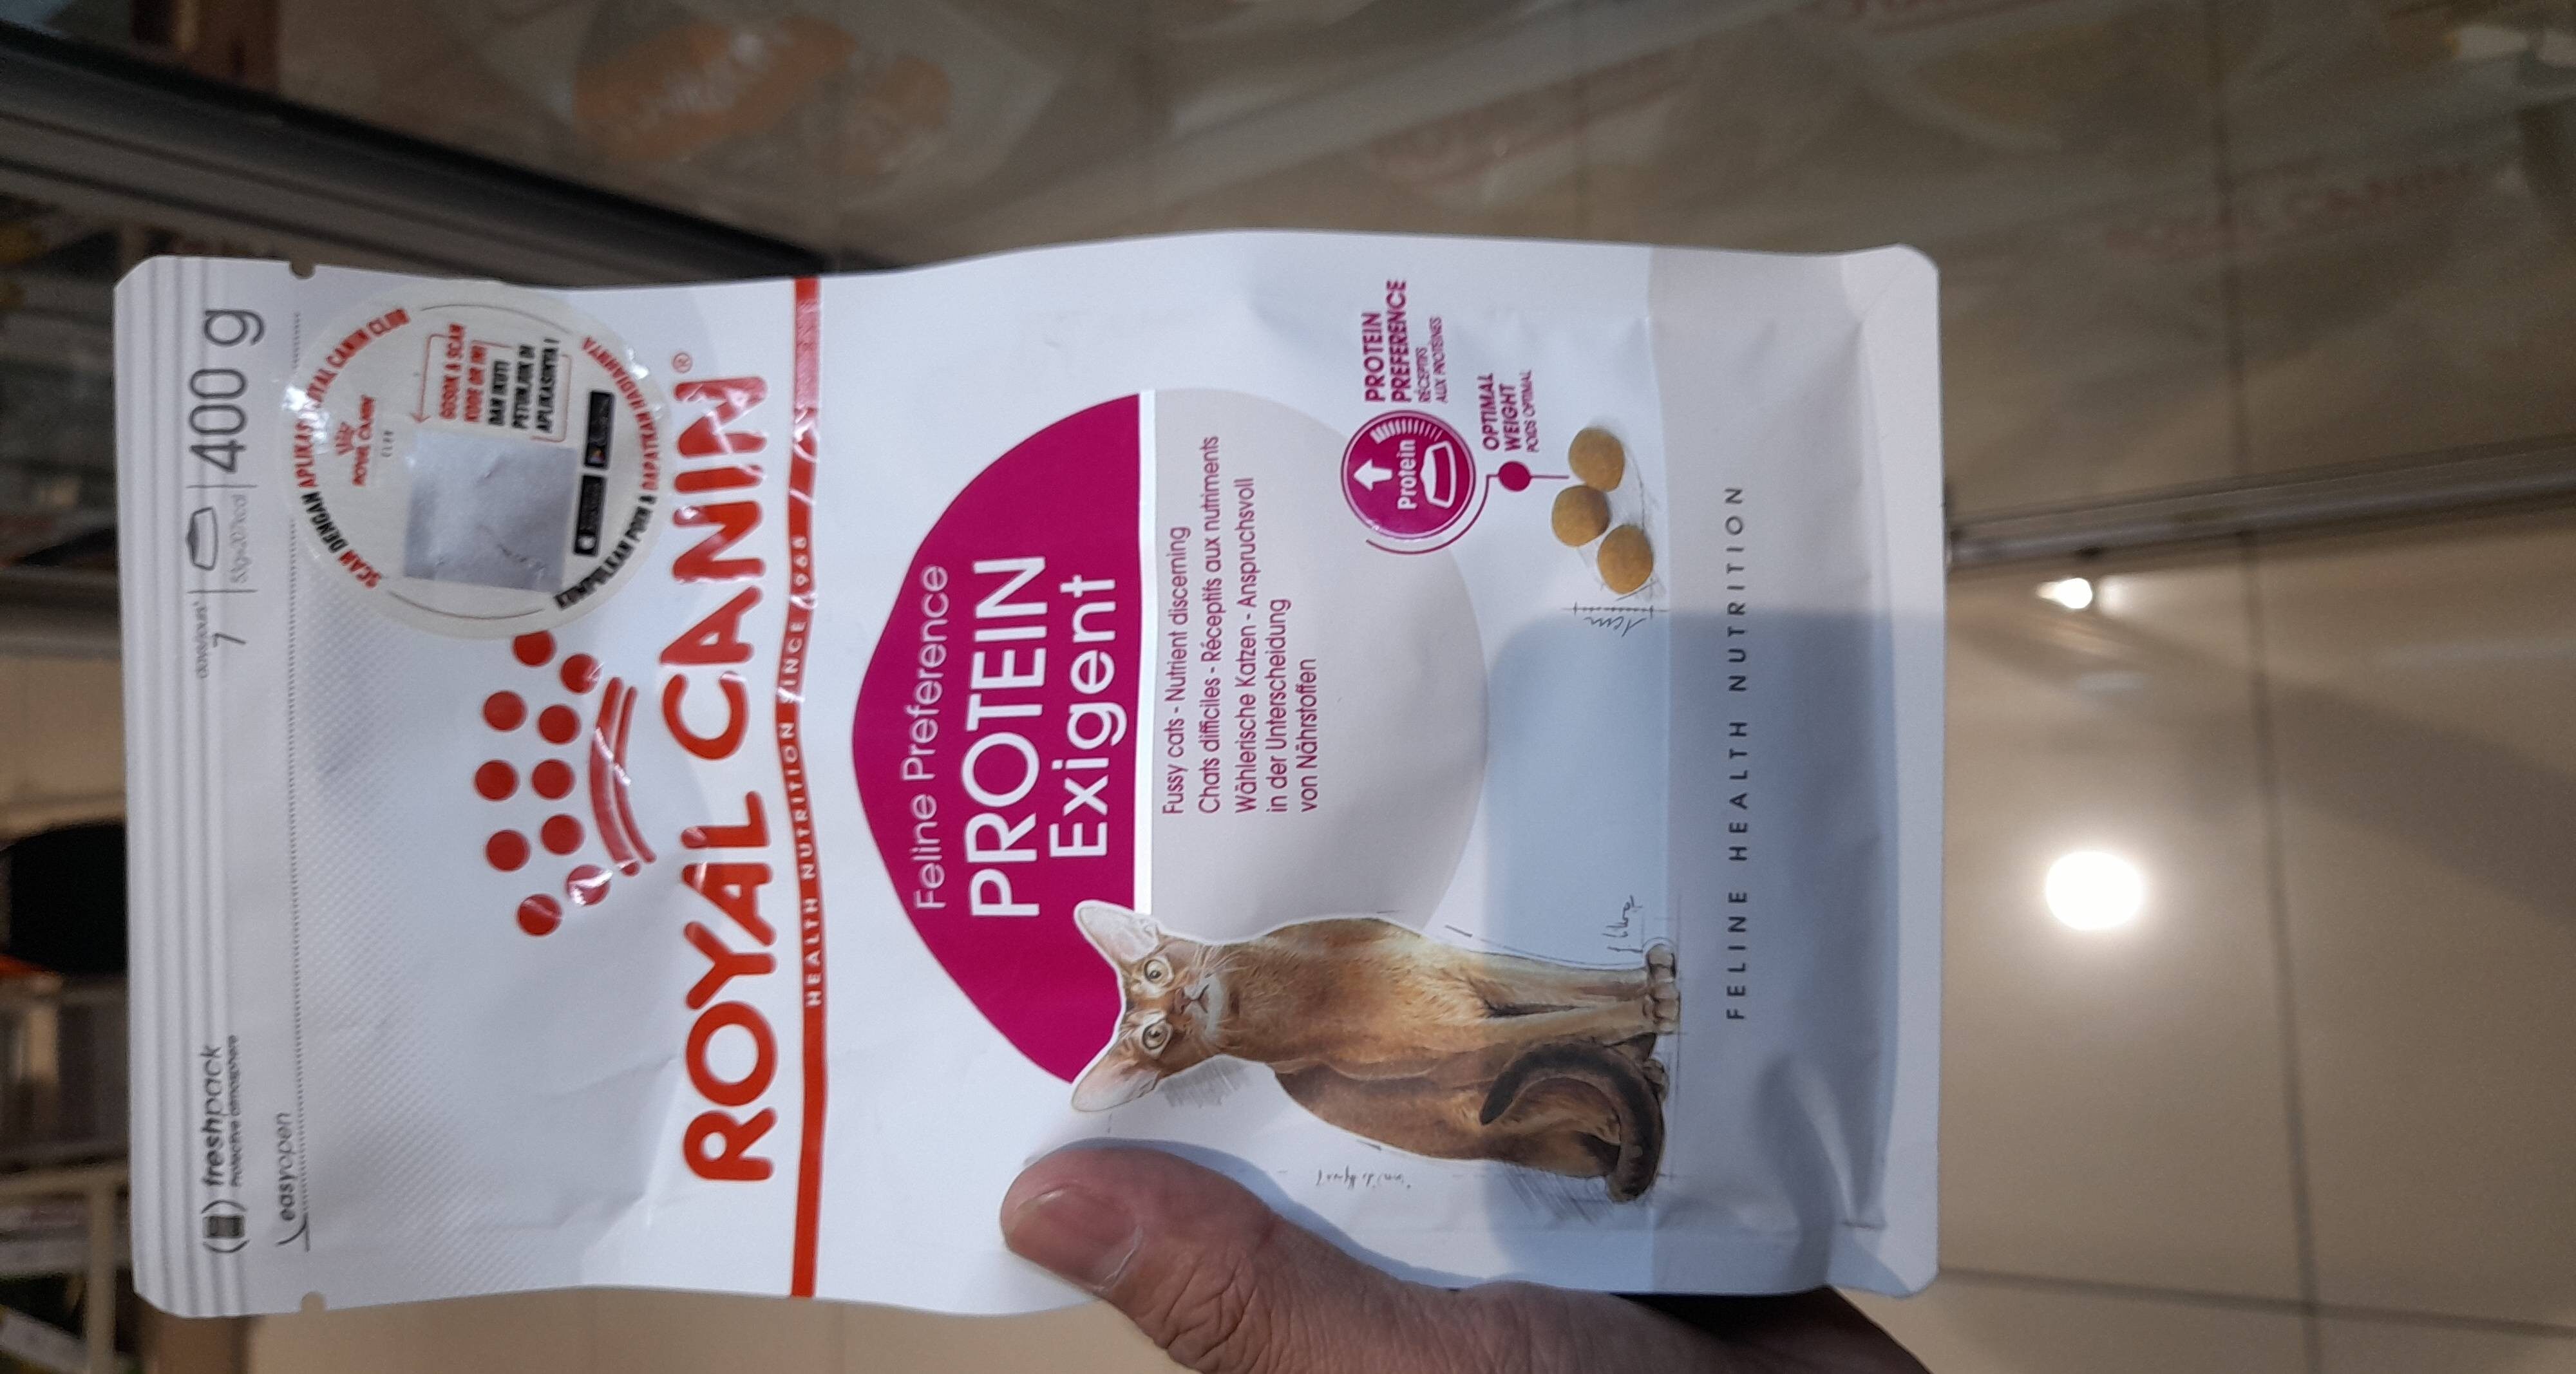 ROYAL CANIN PROTEIN EXIGENT - Product - en